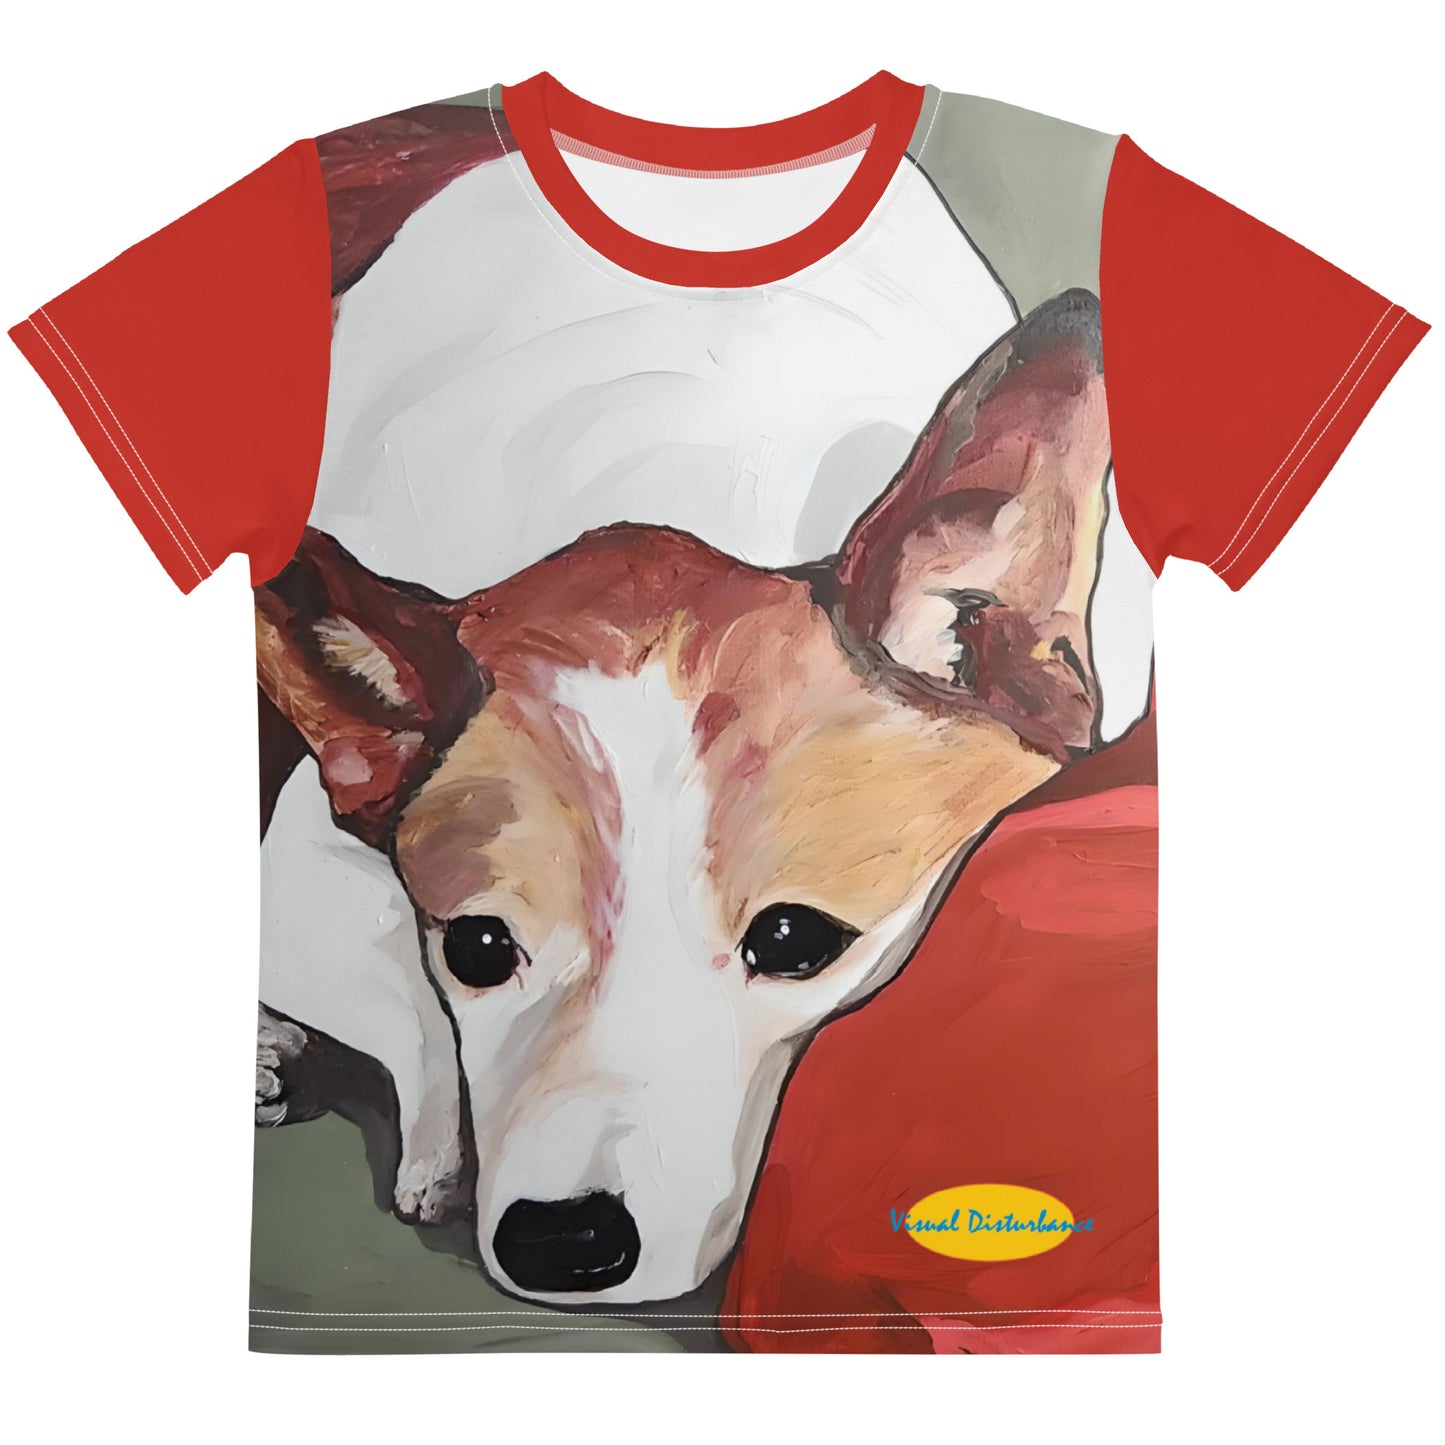 Contented Dog (Red) Kids crew neck t-shirt